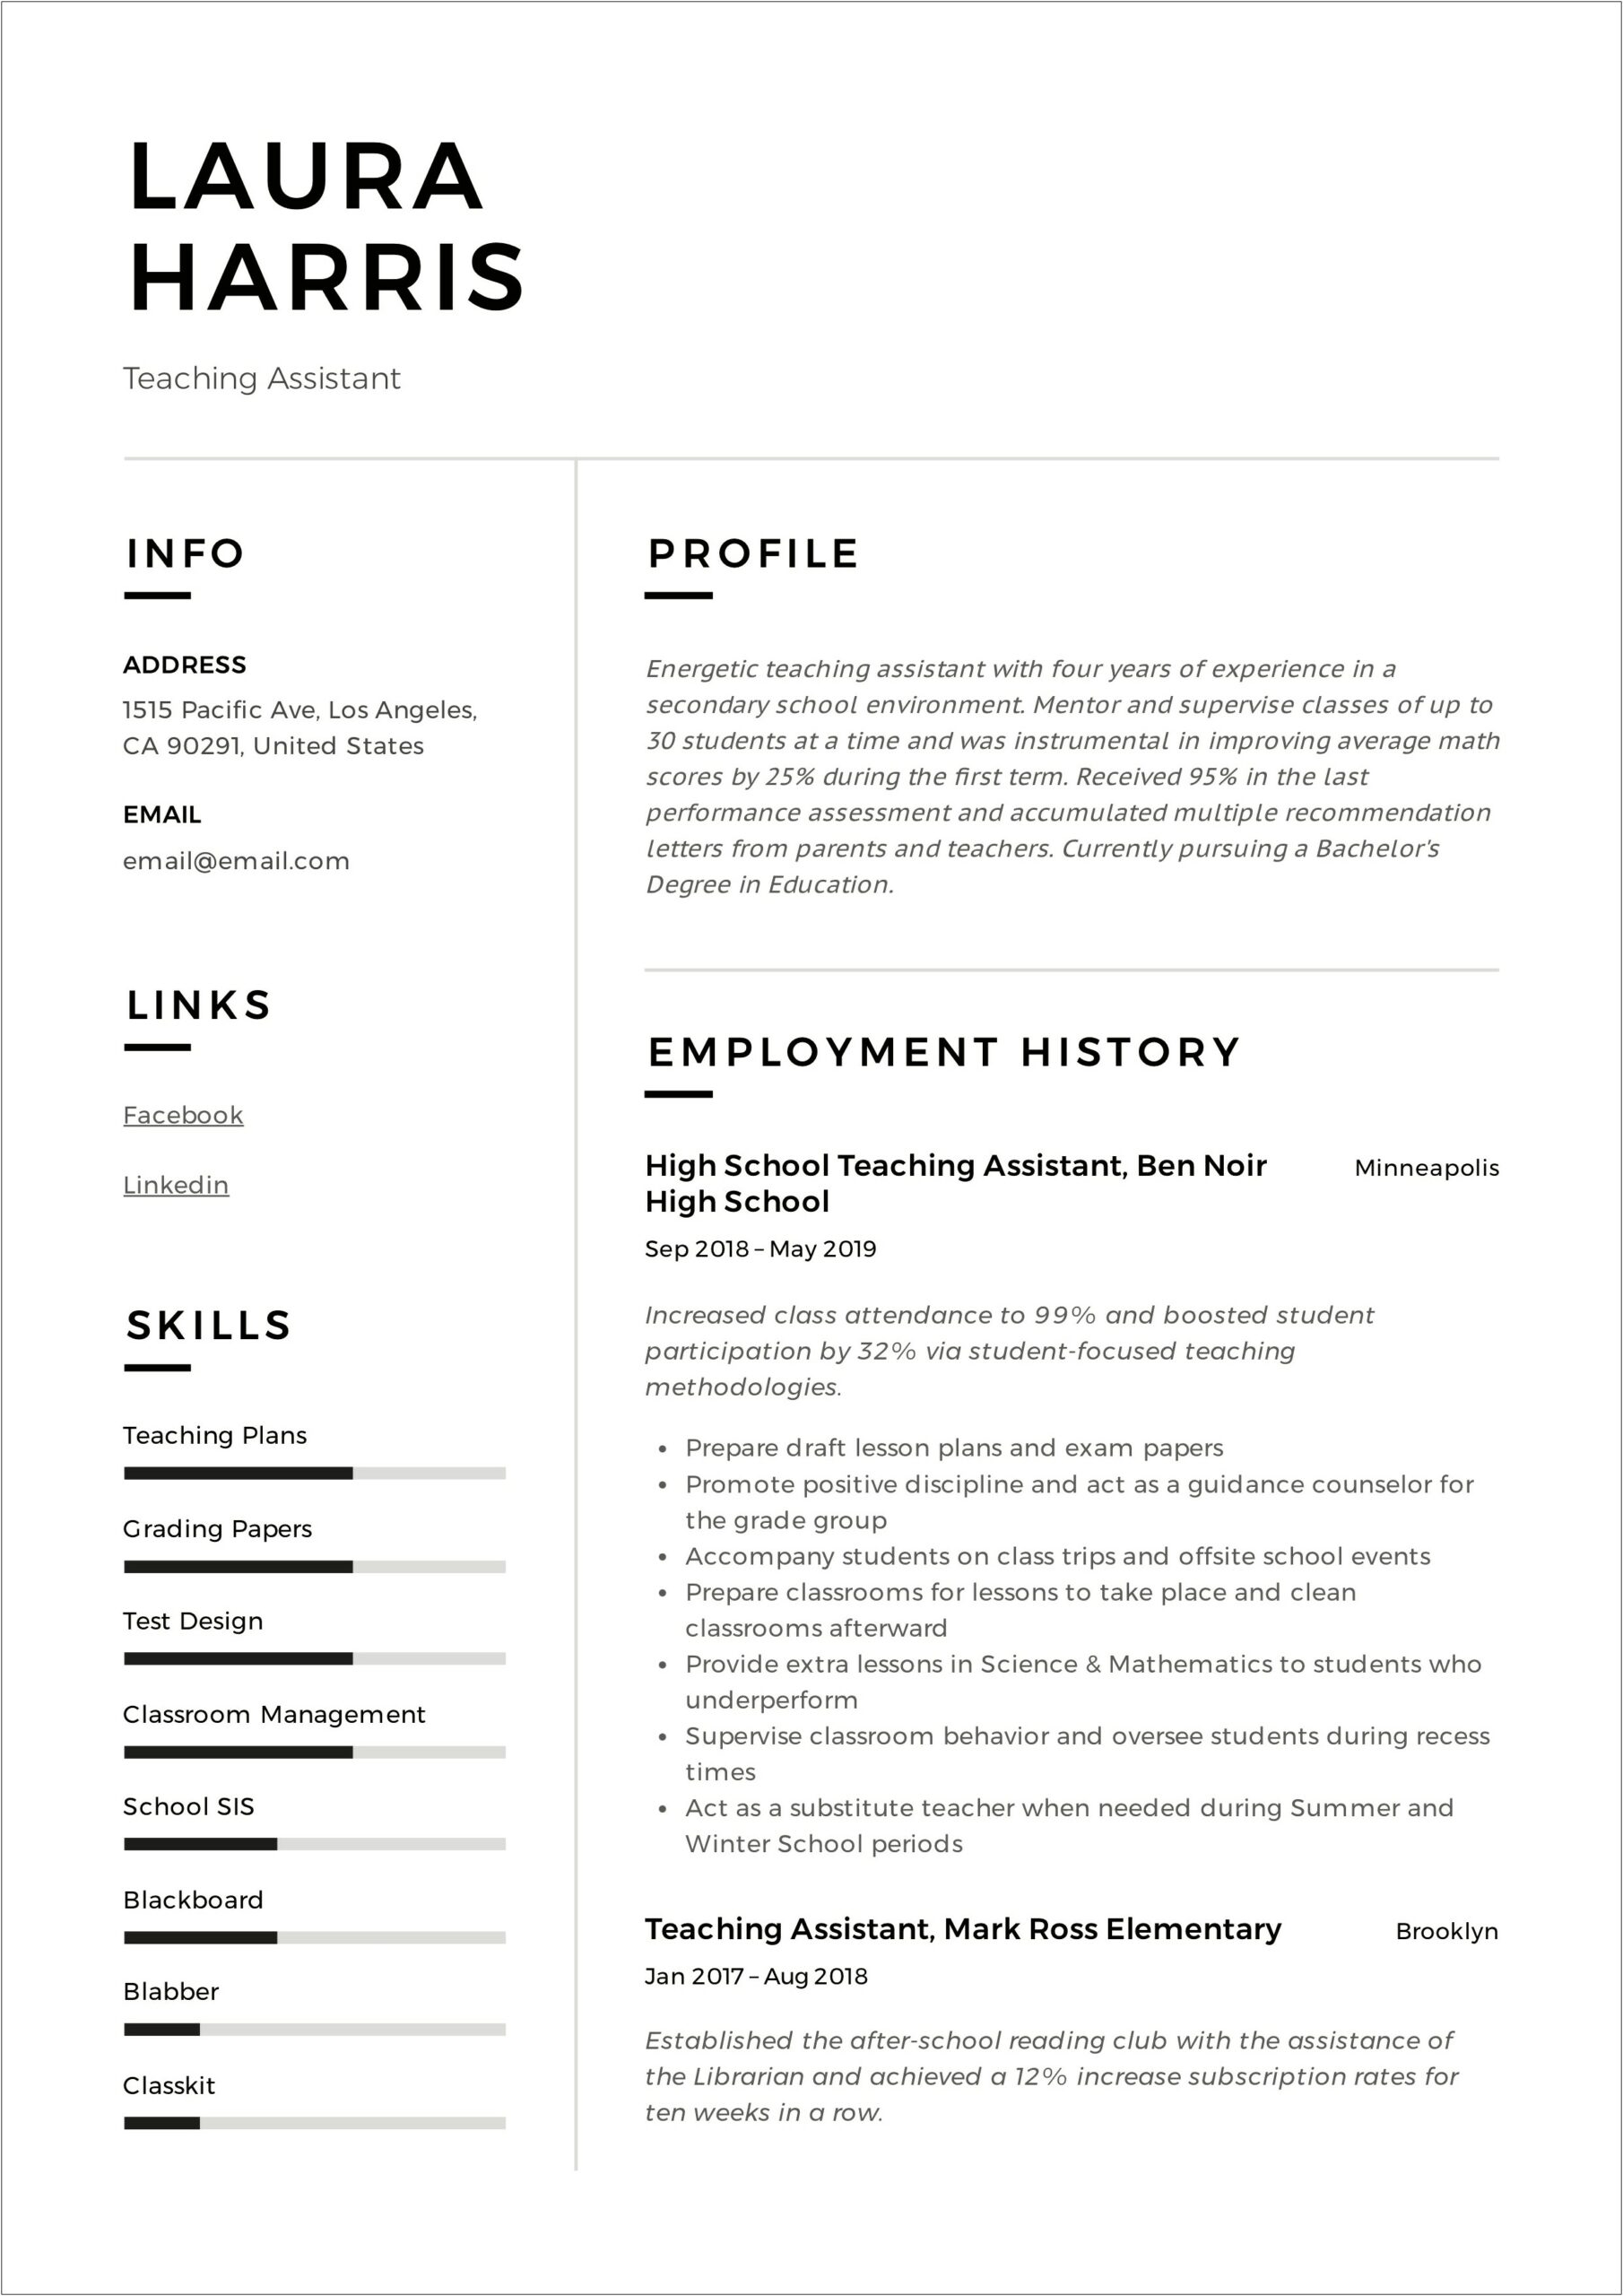 Where To Put Ta Position In Resume